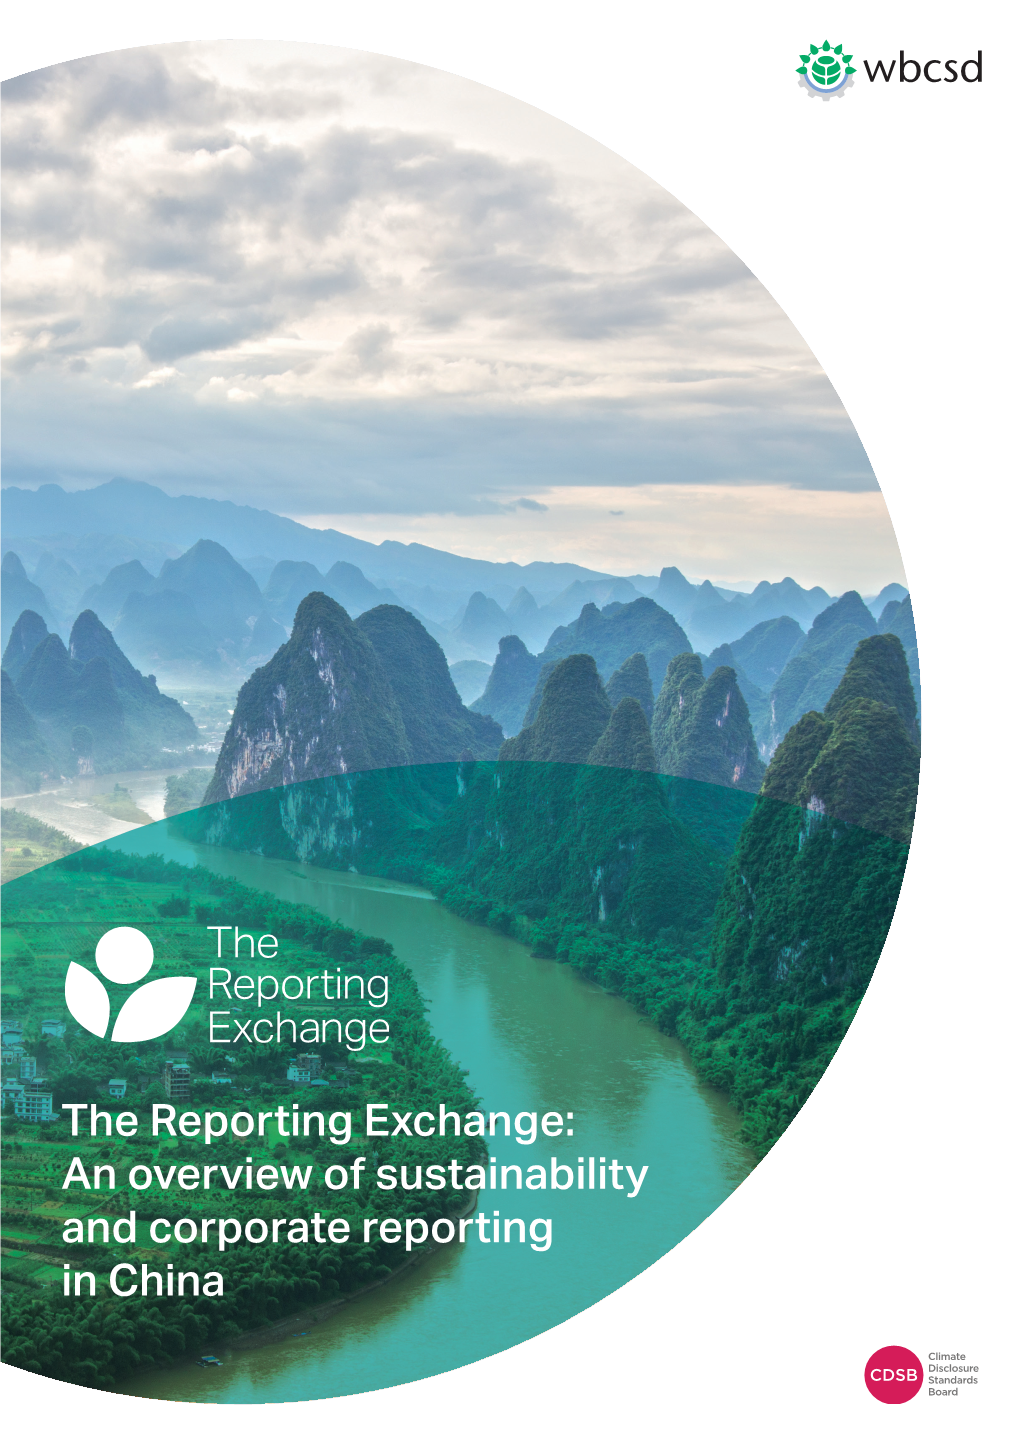 An Overview of Sustainability and Corporate Reporting in China